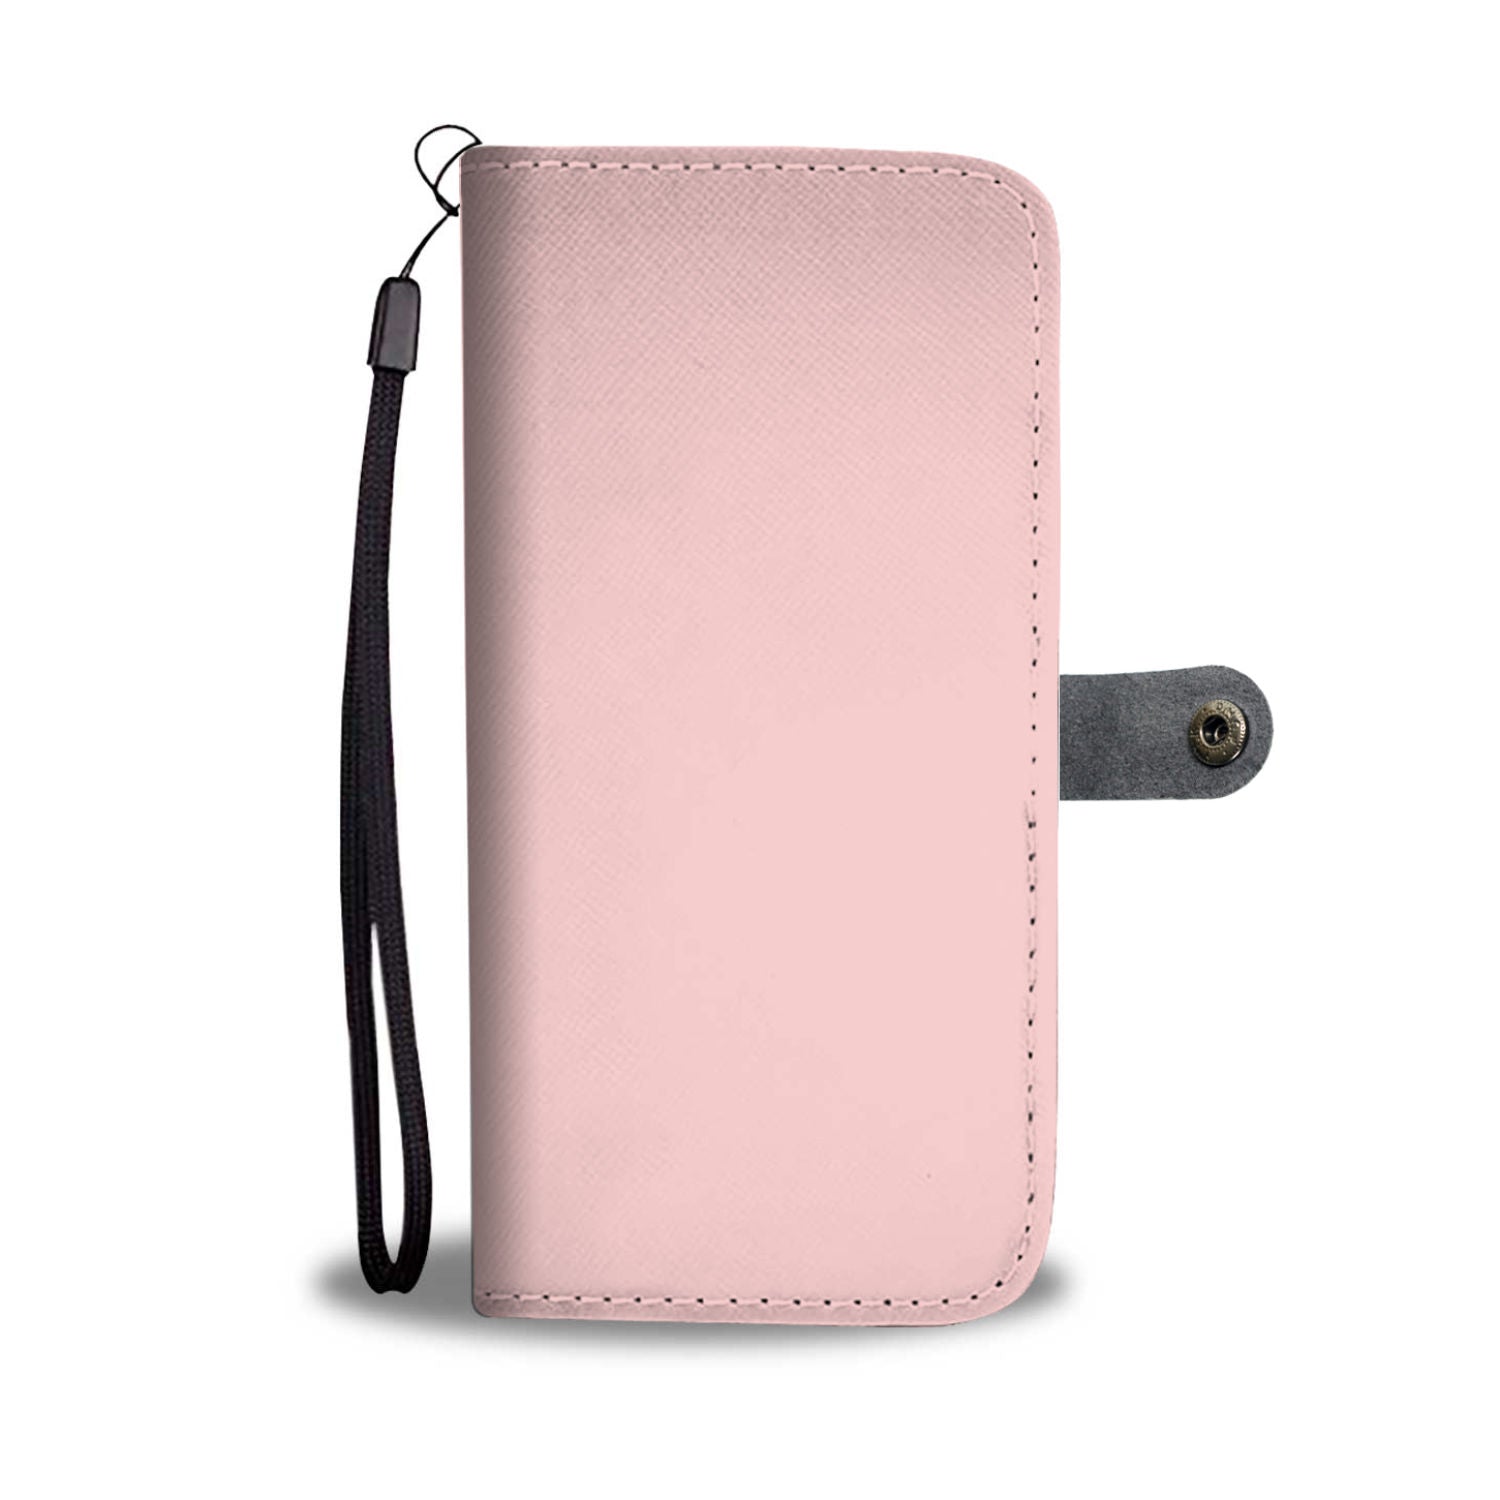 Phone Wallet Case Just the Perfect Shade of